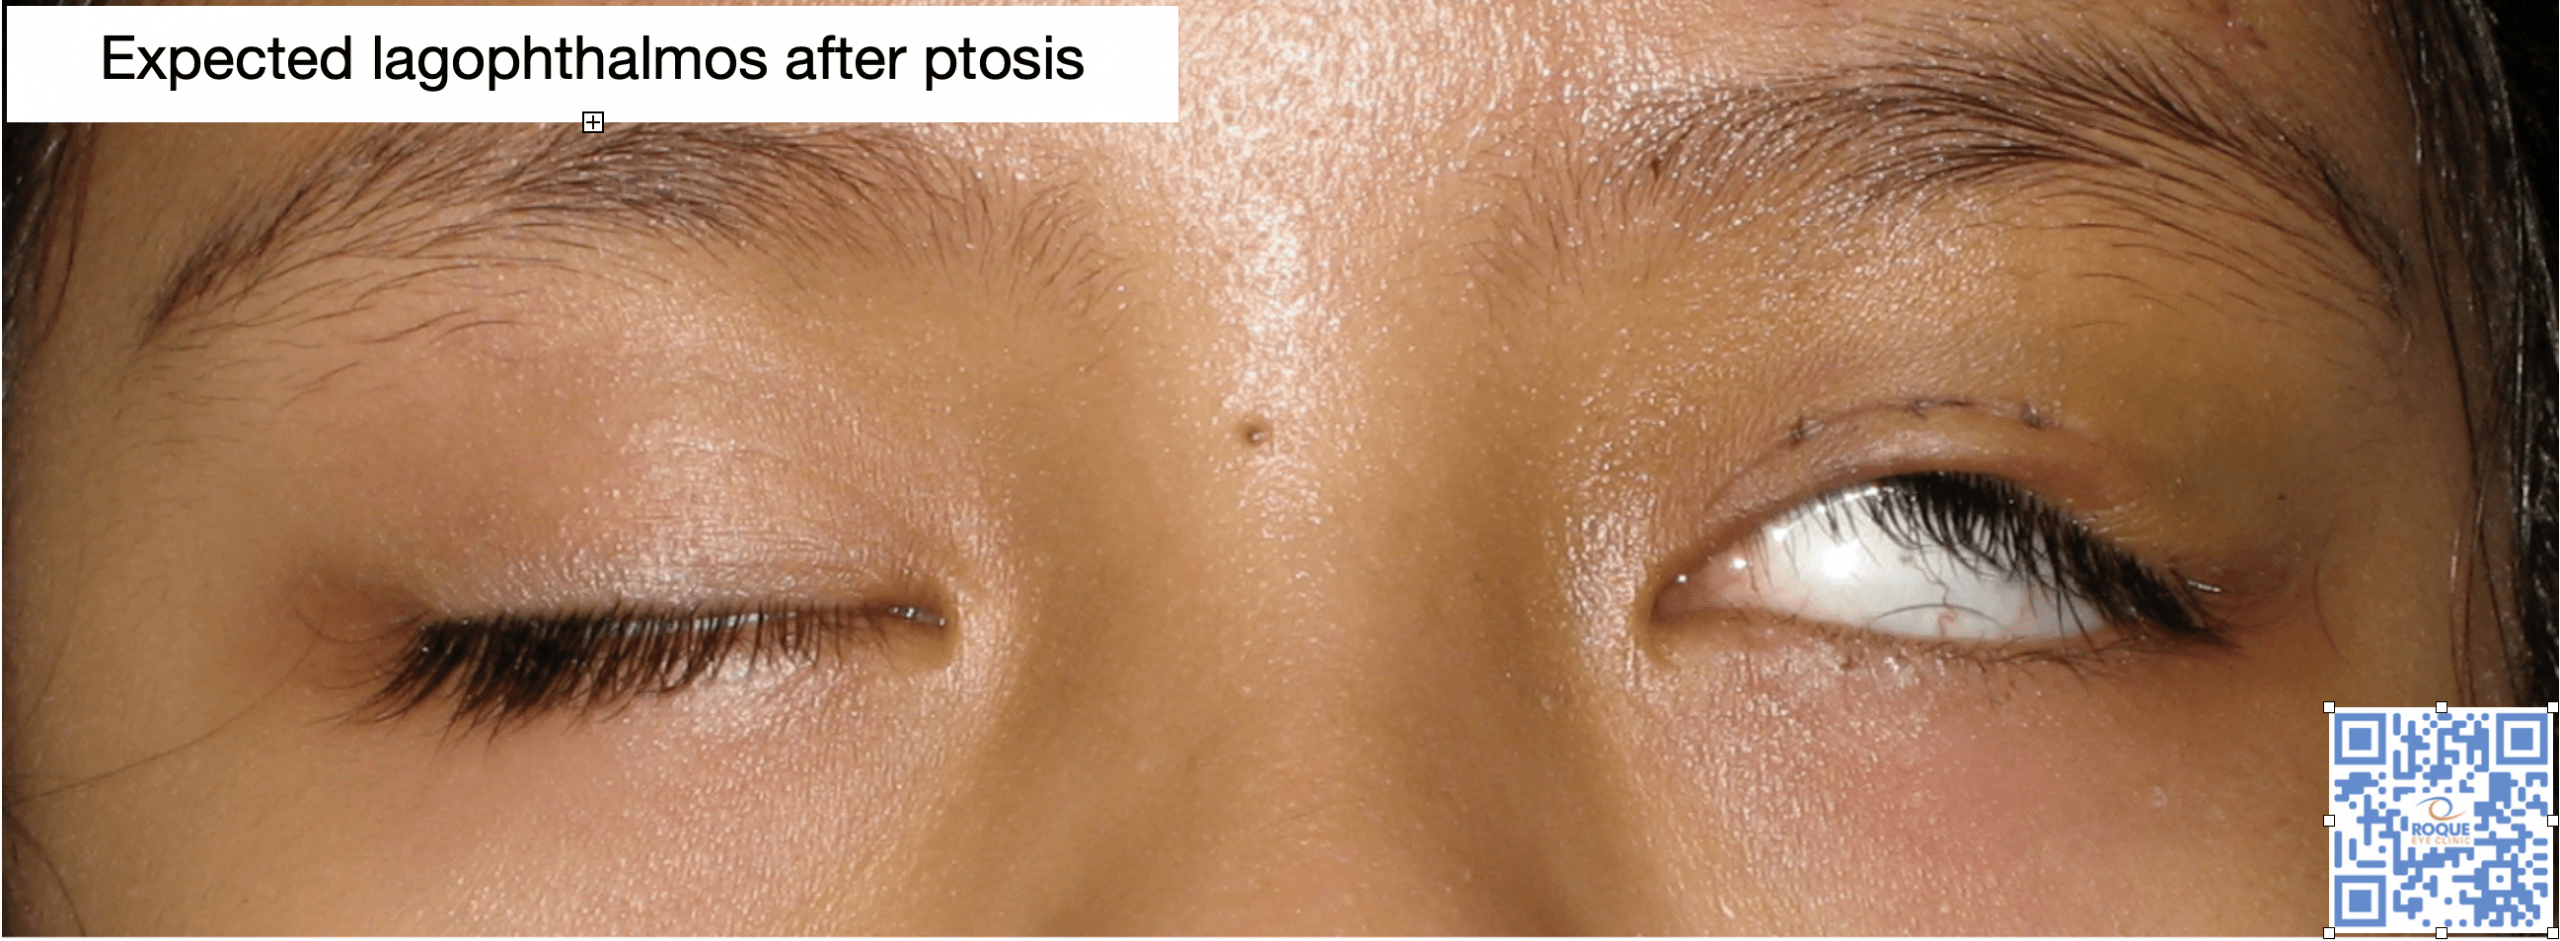 Expected lagophthalmos post ptosis surgery